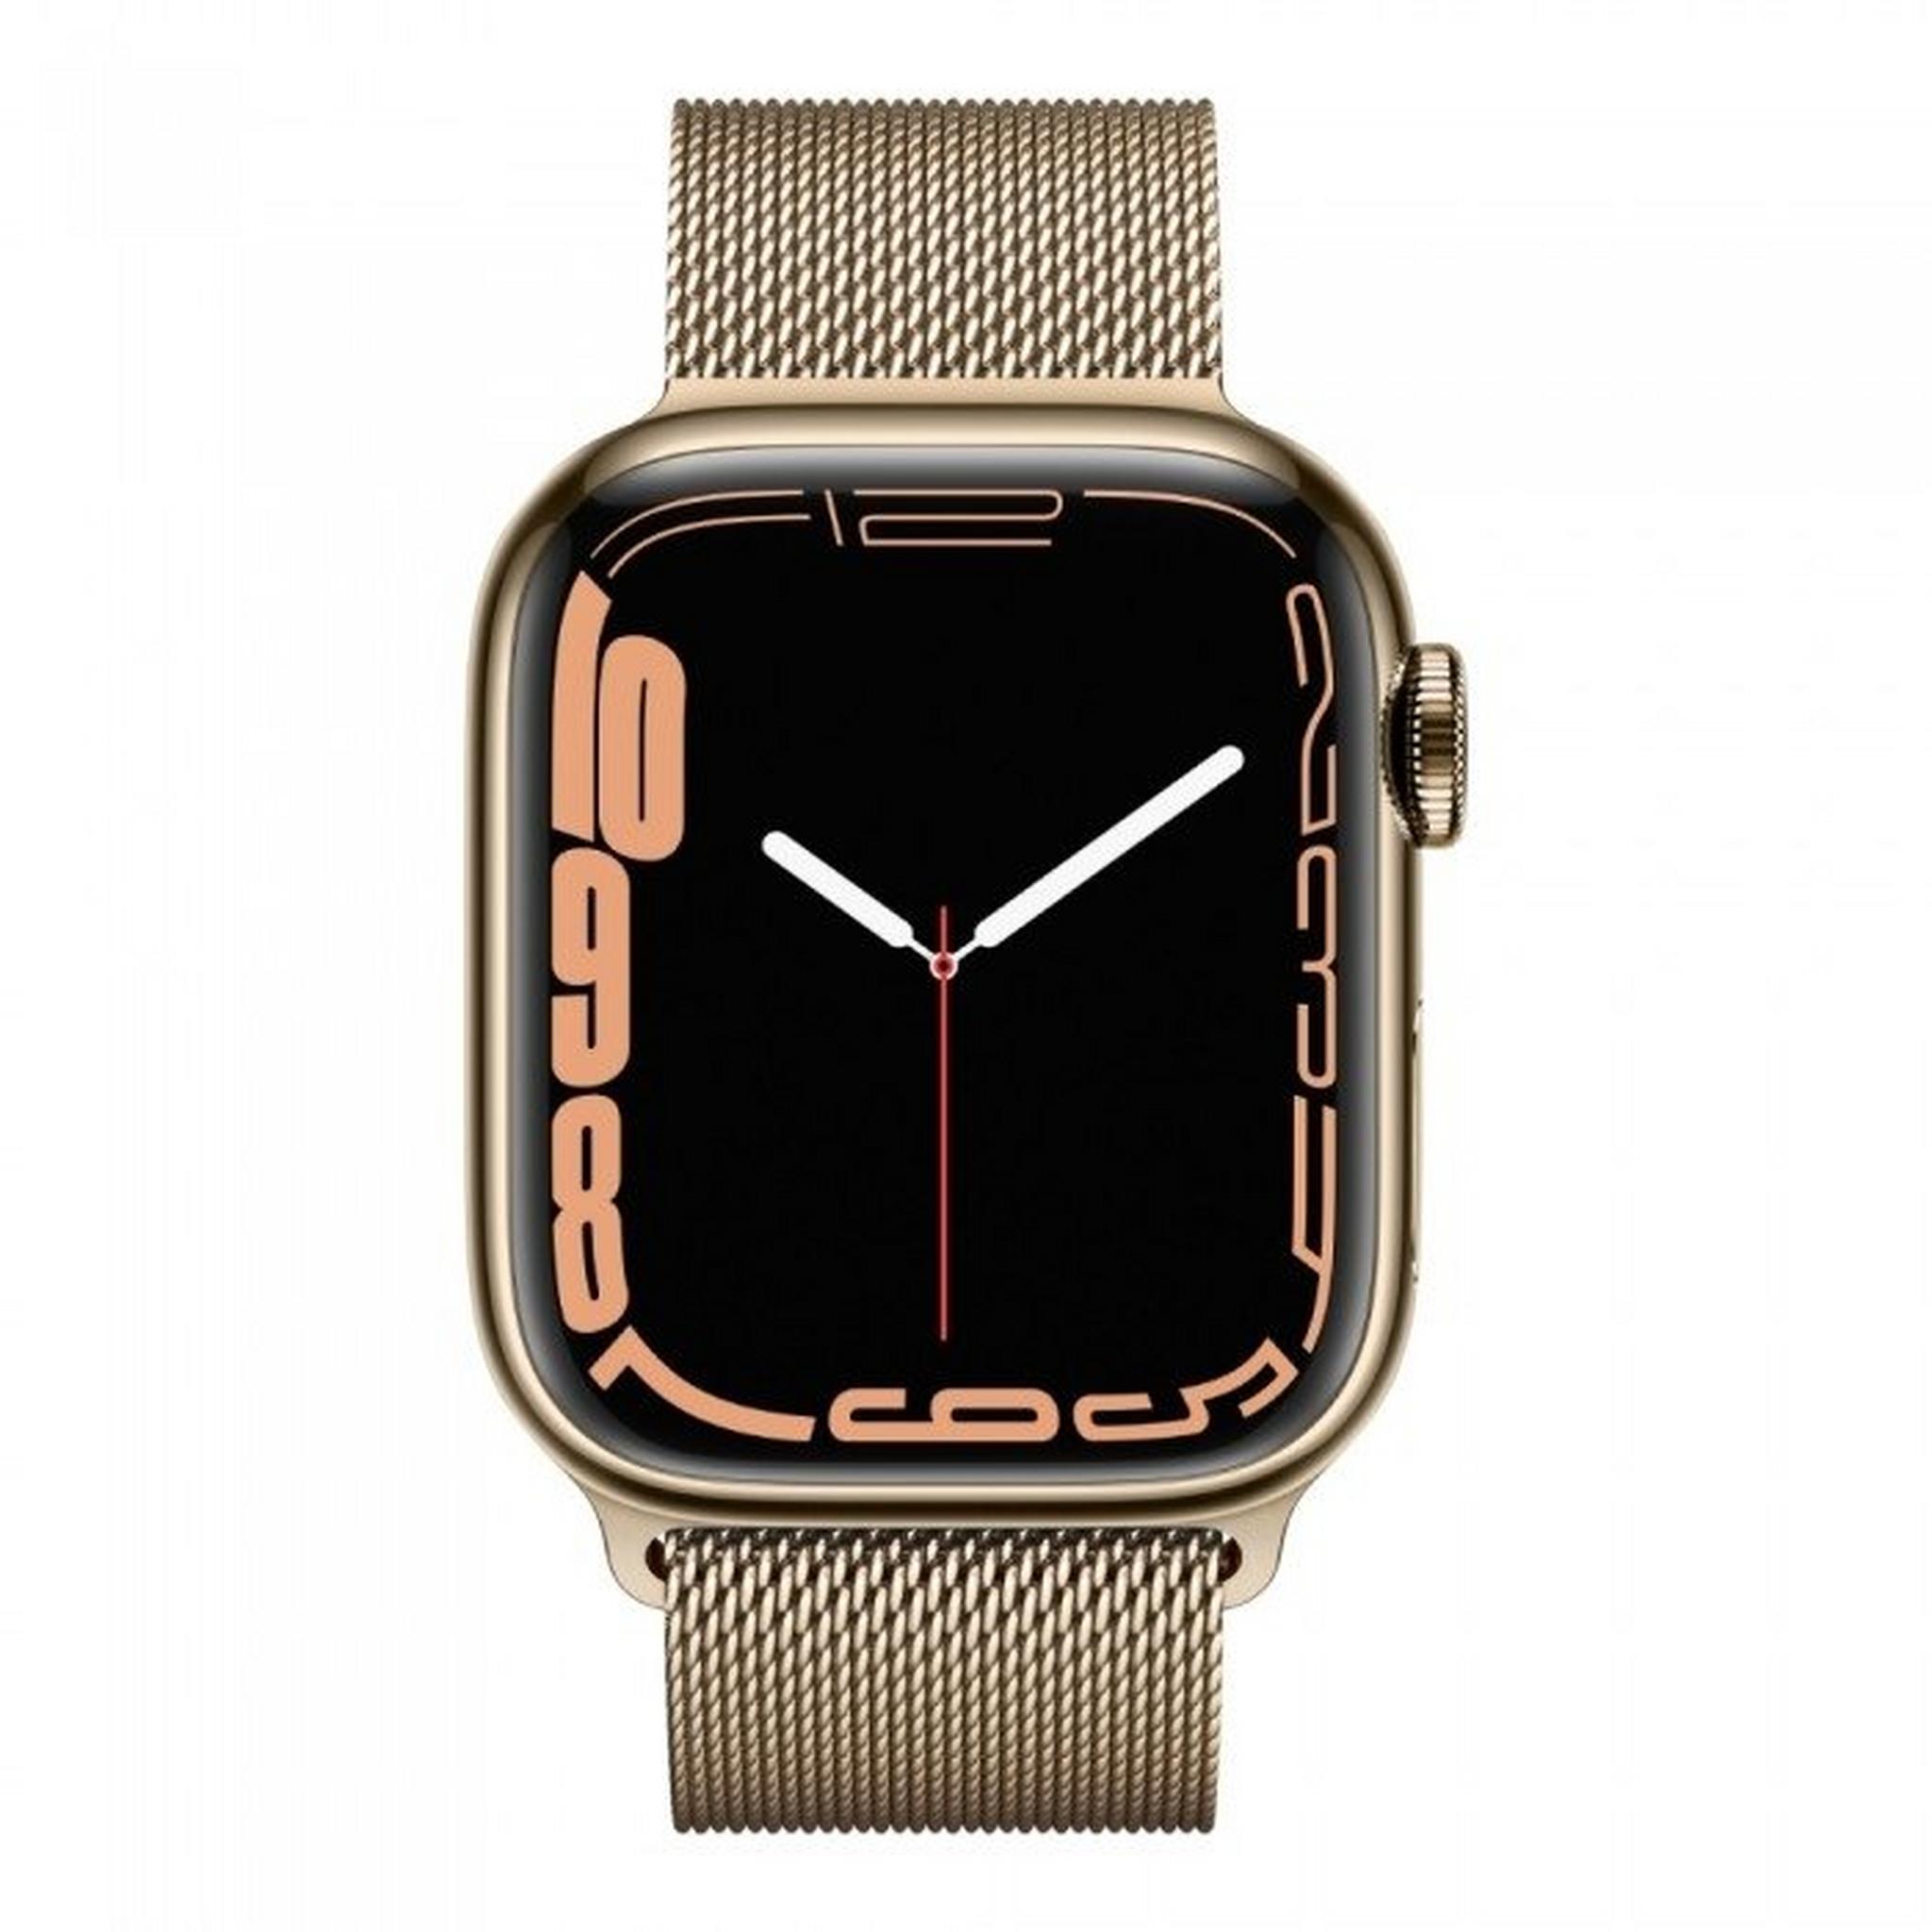 Apple Watch Series 7 Cellular 45mm Stainless Steel - Gold